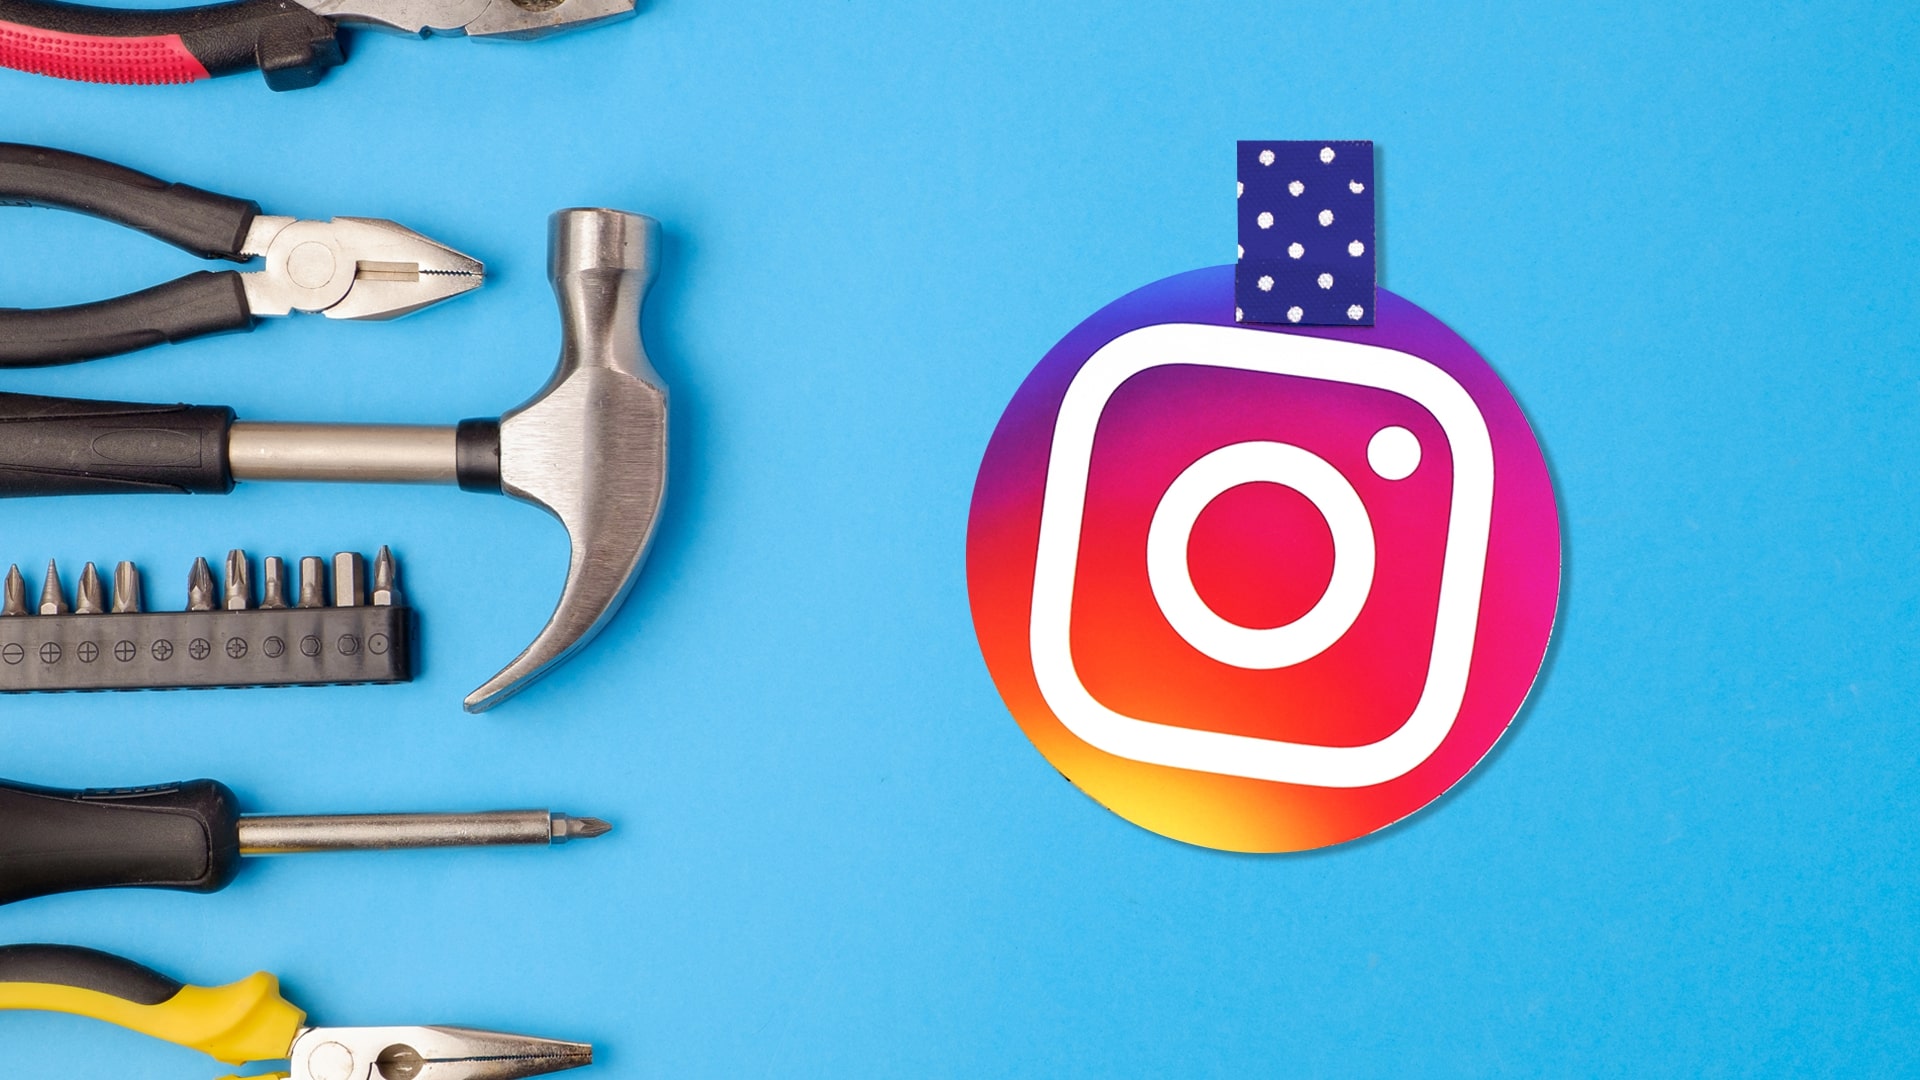 Instagram Metrics You Should Track to Measure Performance